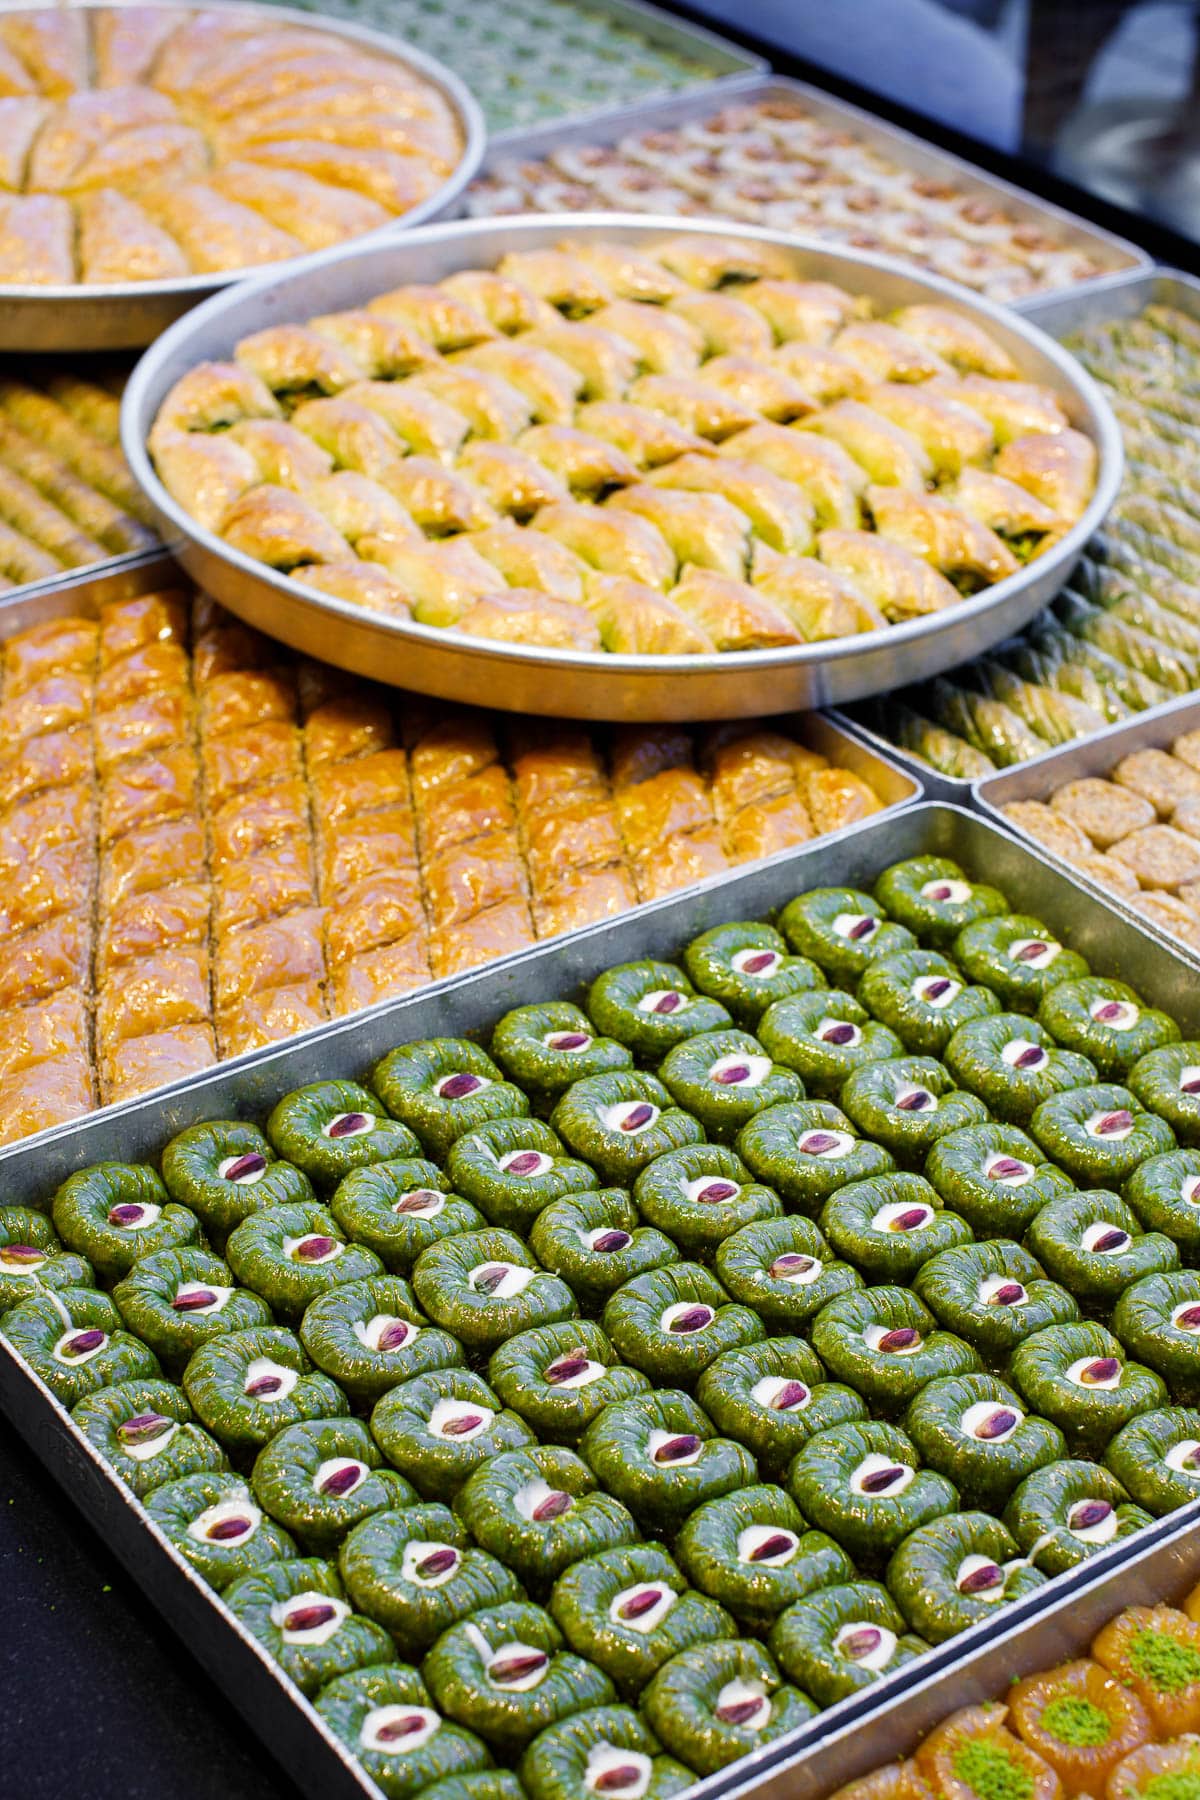 Selection of baklava at a bakery in Istanbul.